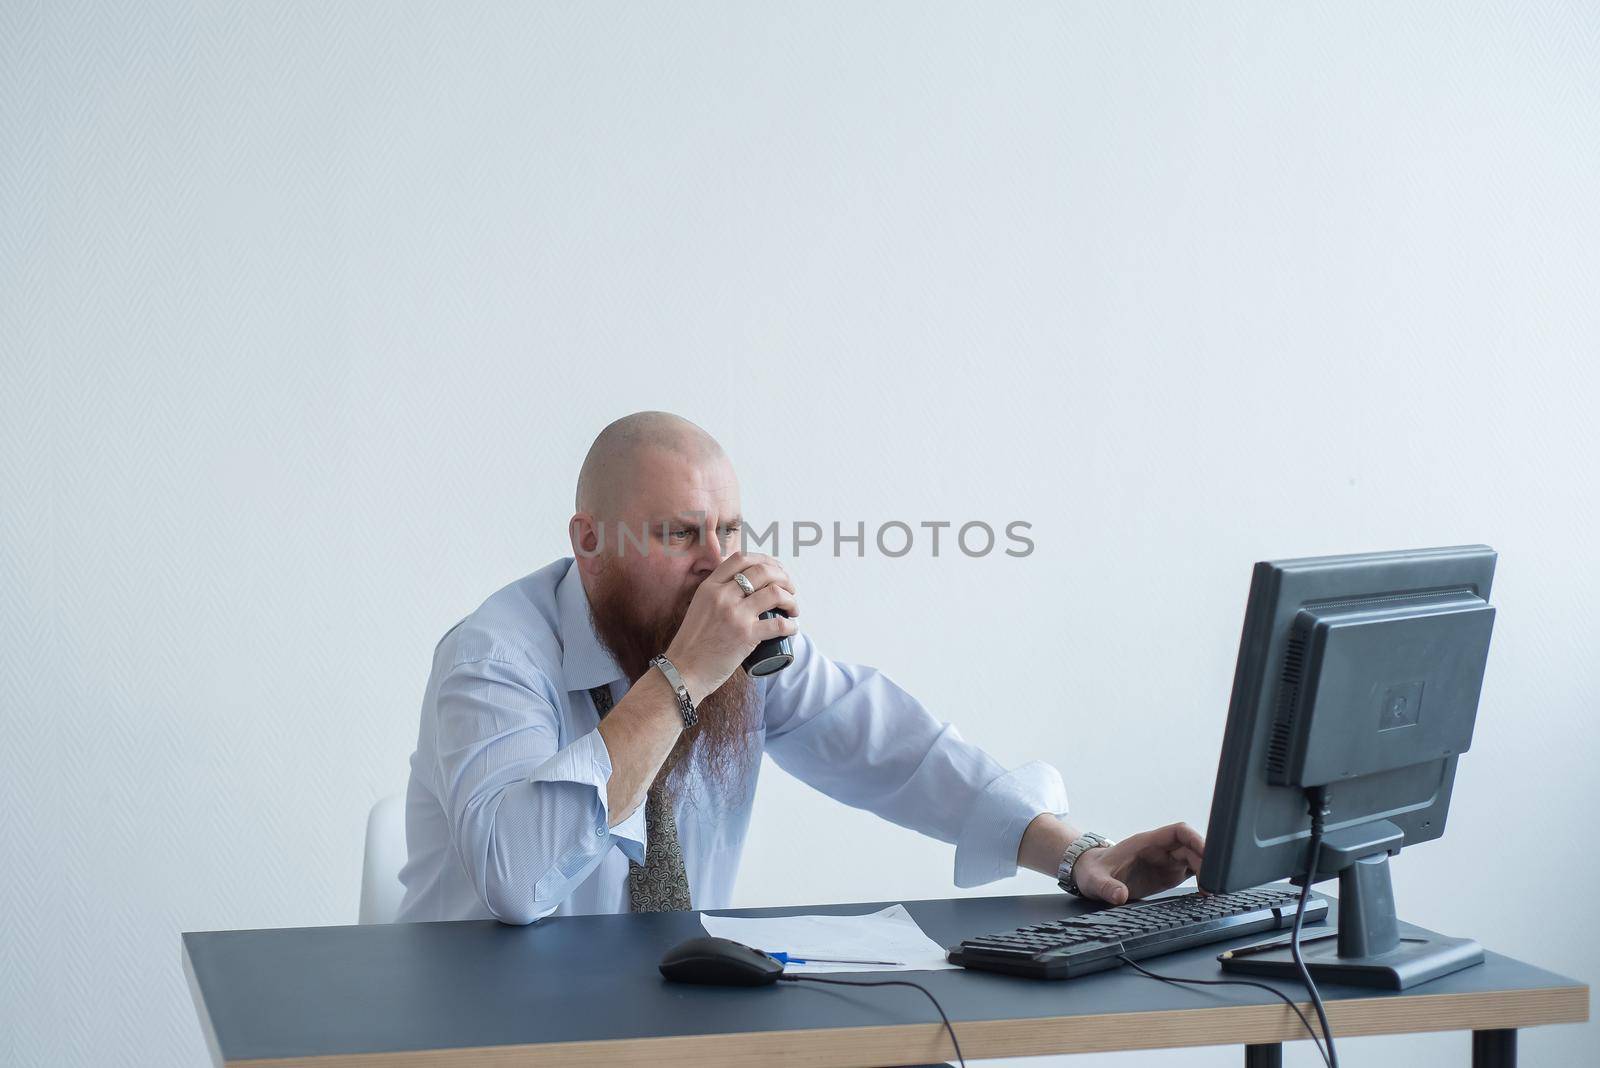 Problems for the office worker. A bald man in a white shirt sits at a desk with a computer and is stressed because of failure. A nervous breakdown